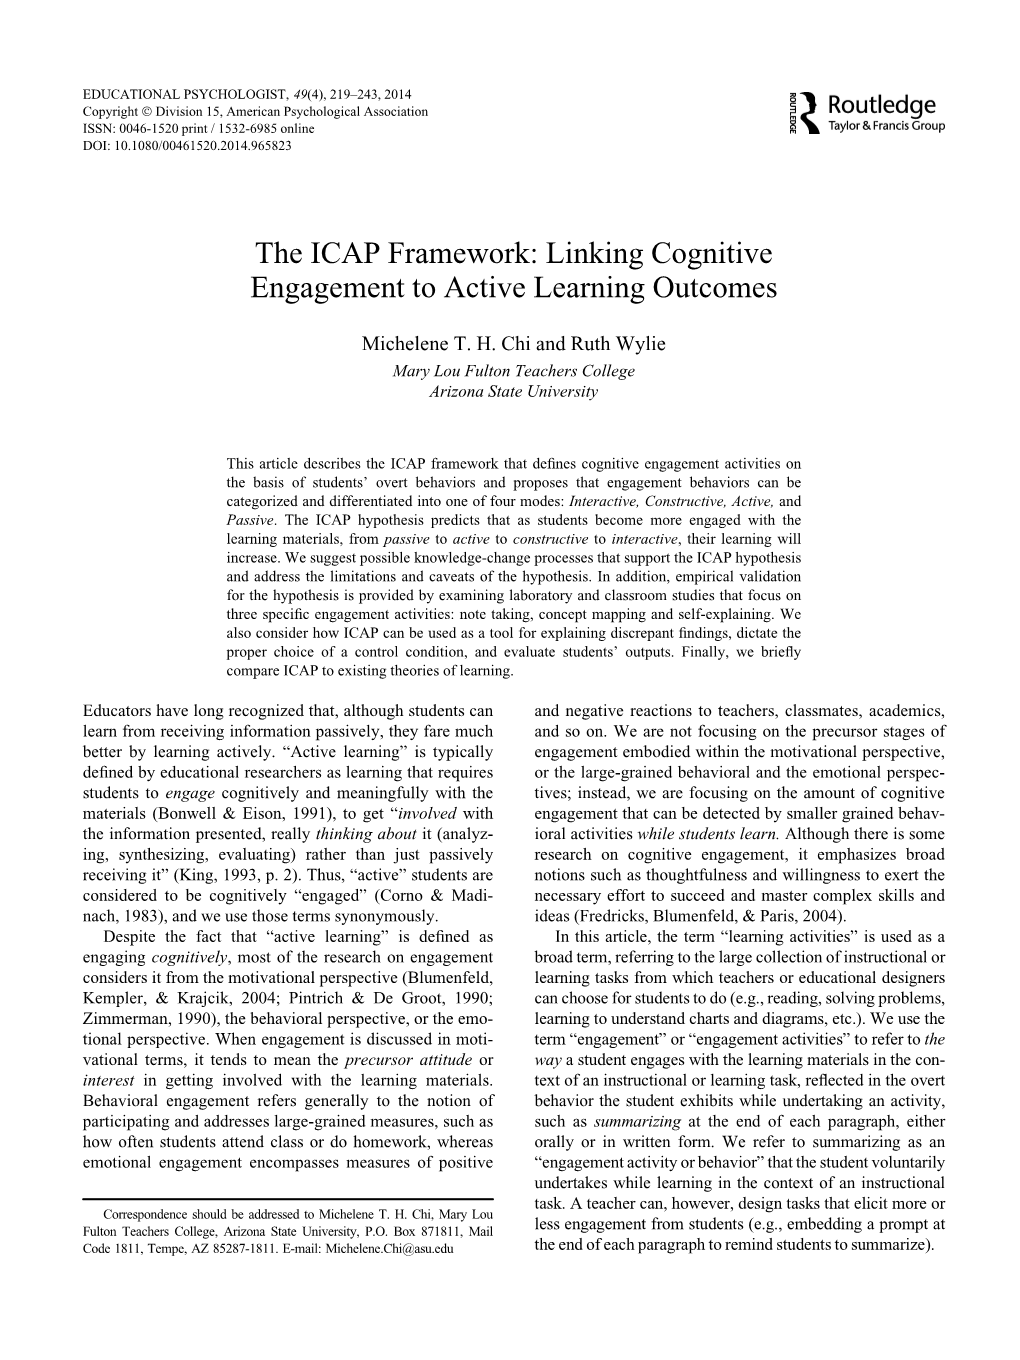 ICAP Framework: Linking Cognitive Engagement to Active Learning Outcomes